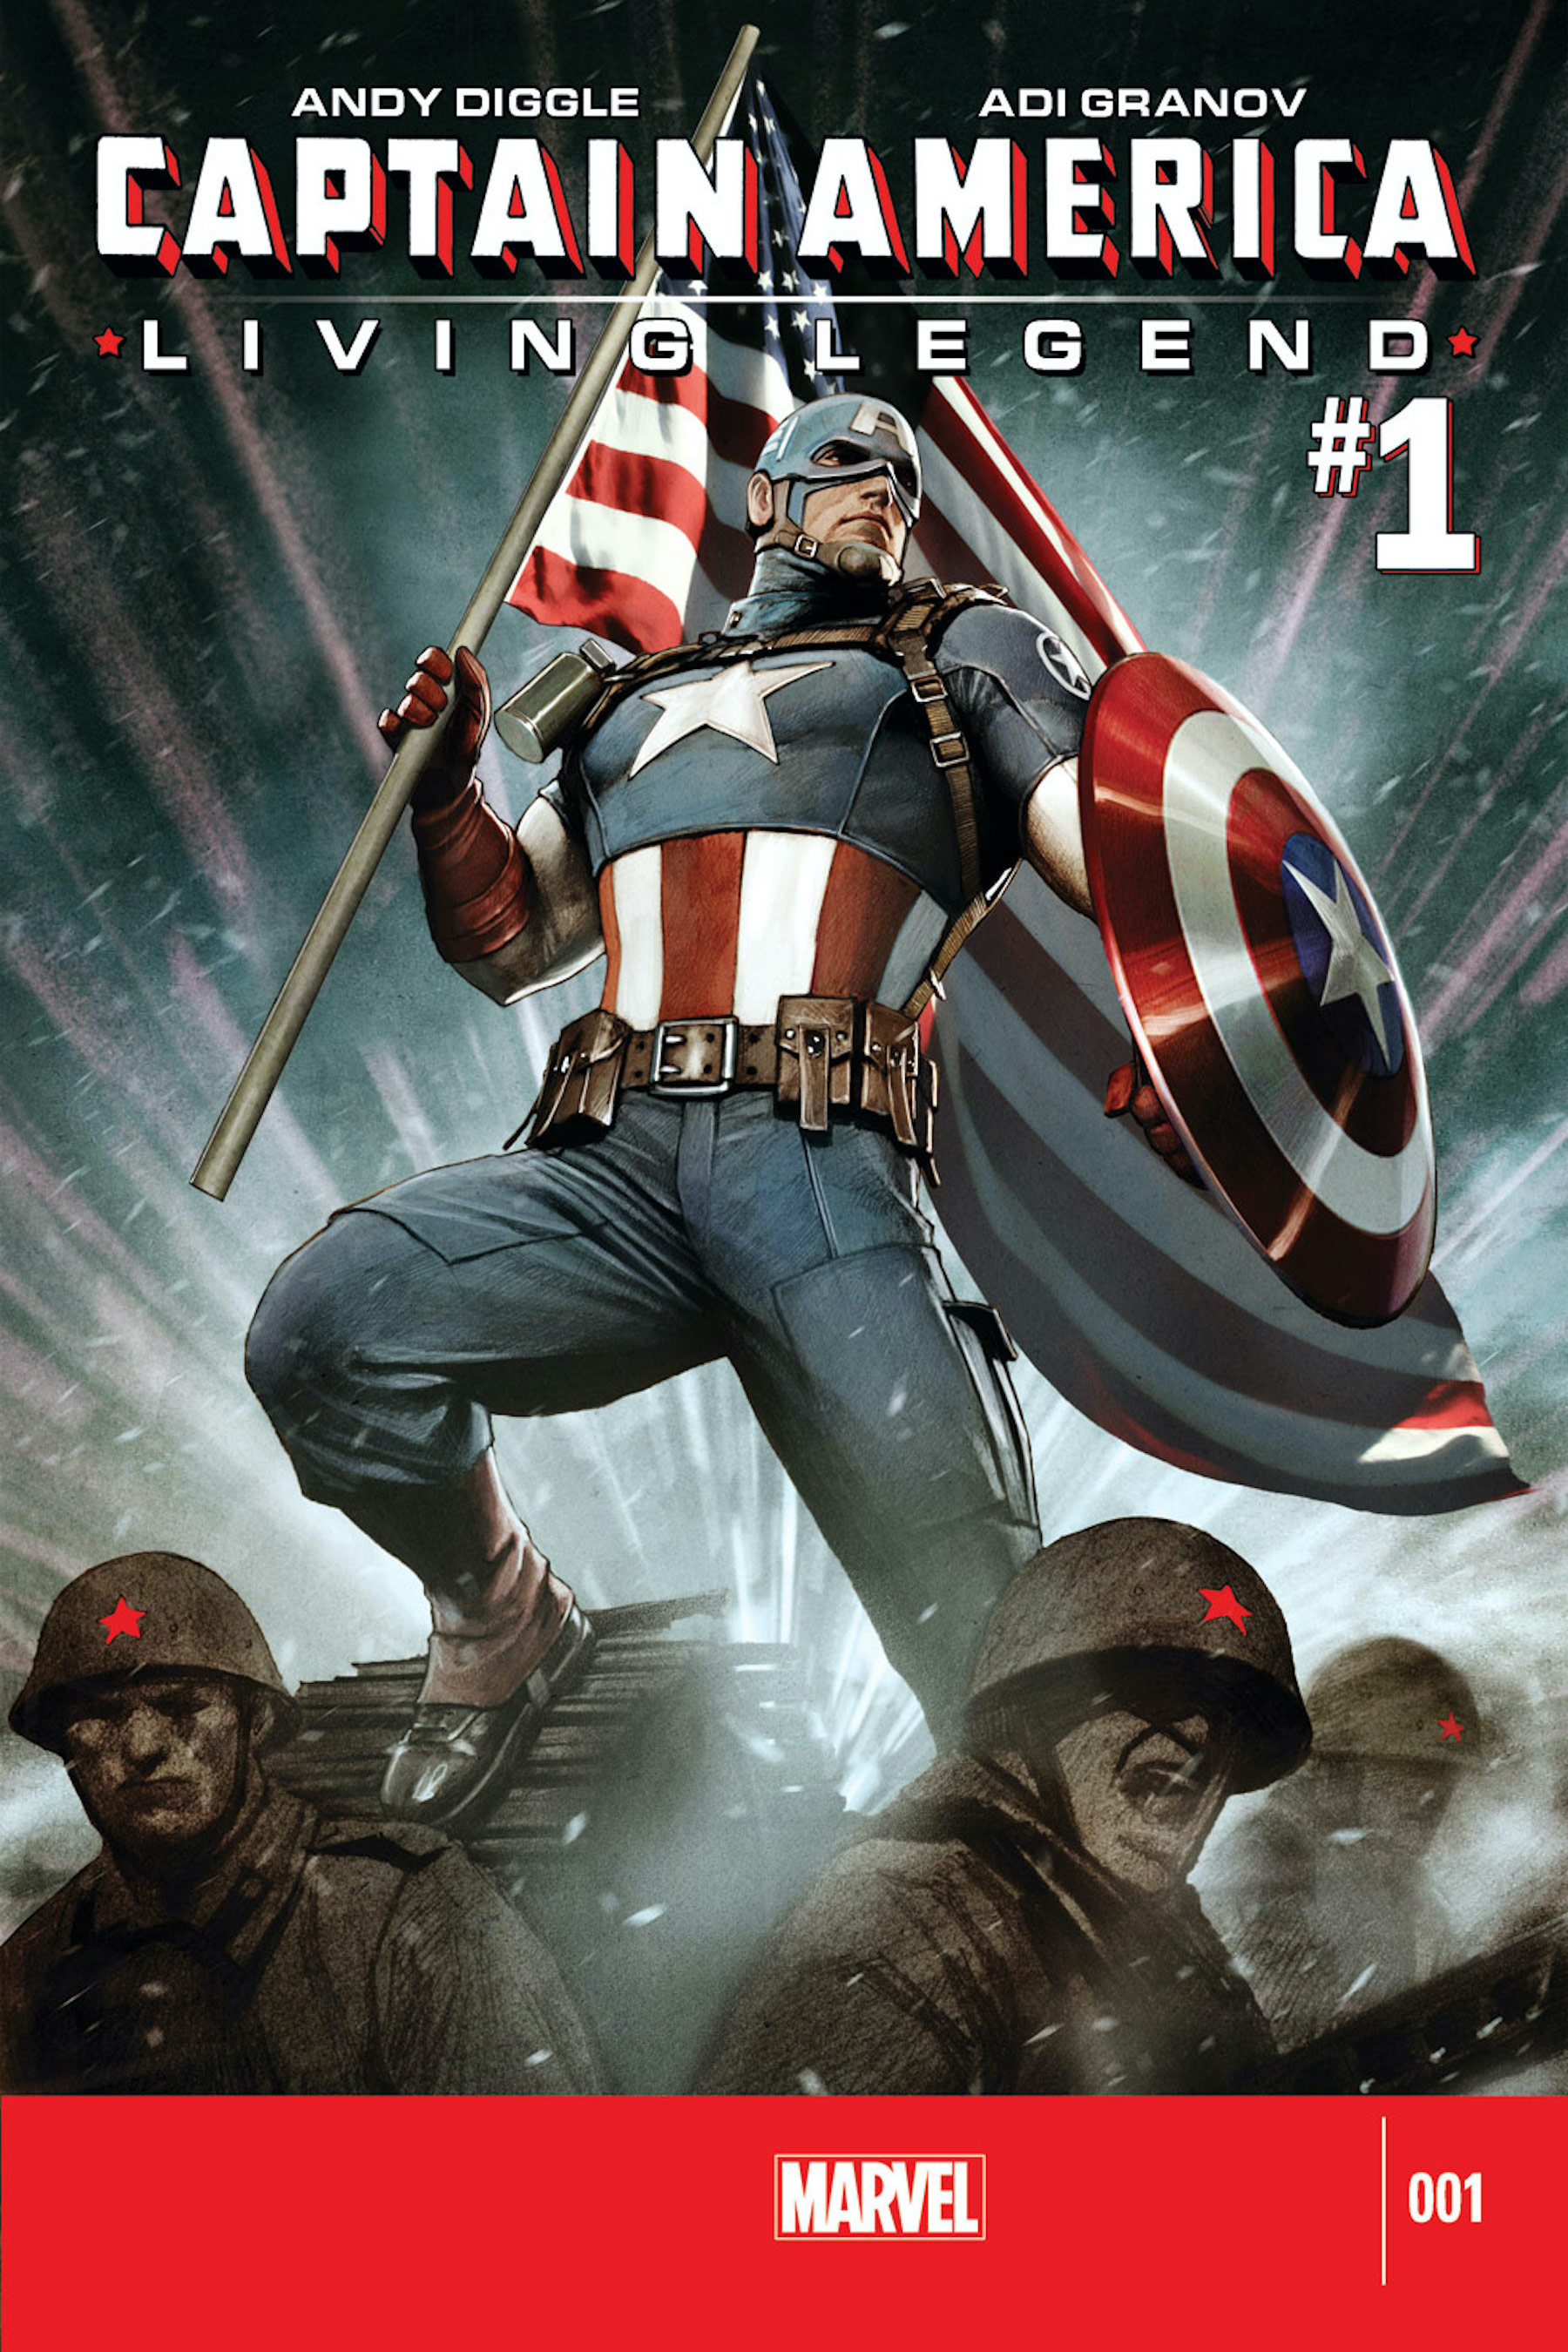 Zach Wilson by J.L. Giles and Ian Herring, after CAPTAIN AMERICA: LIVING LEGEND #1 by Adi Granov